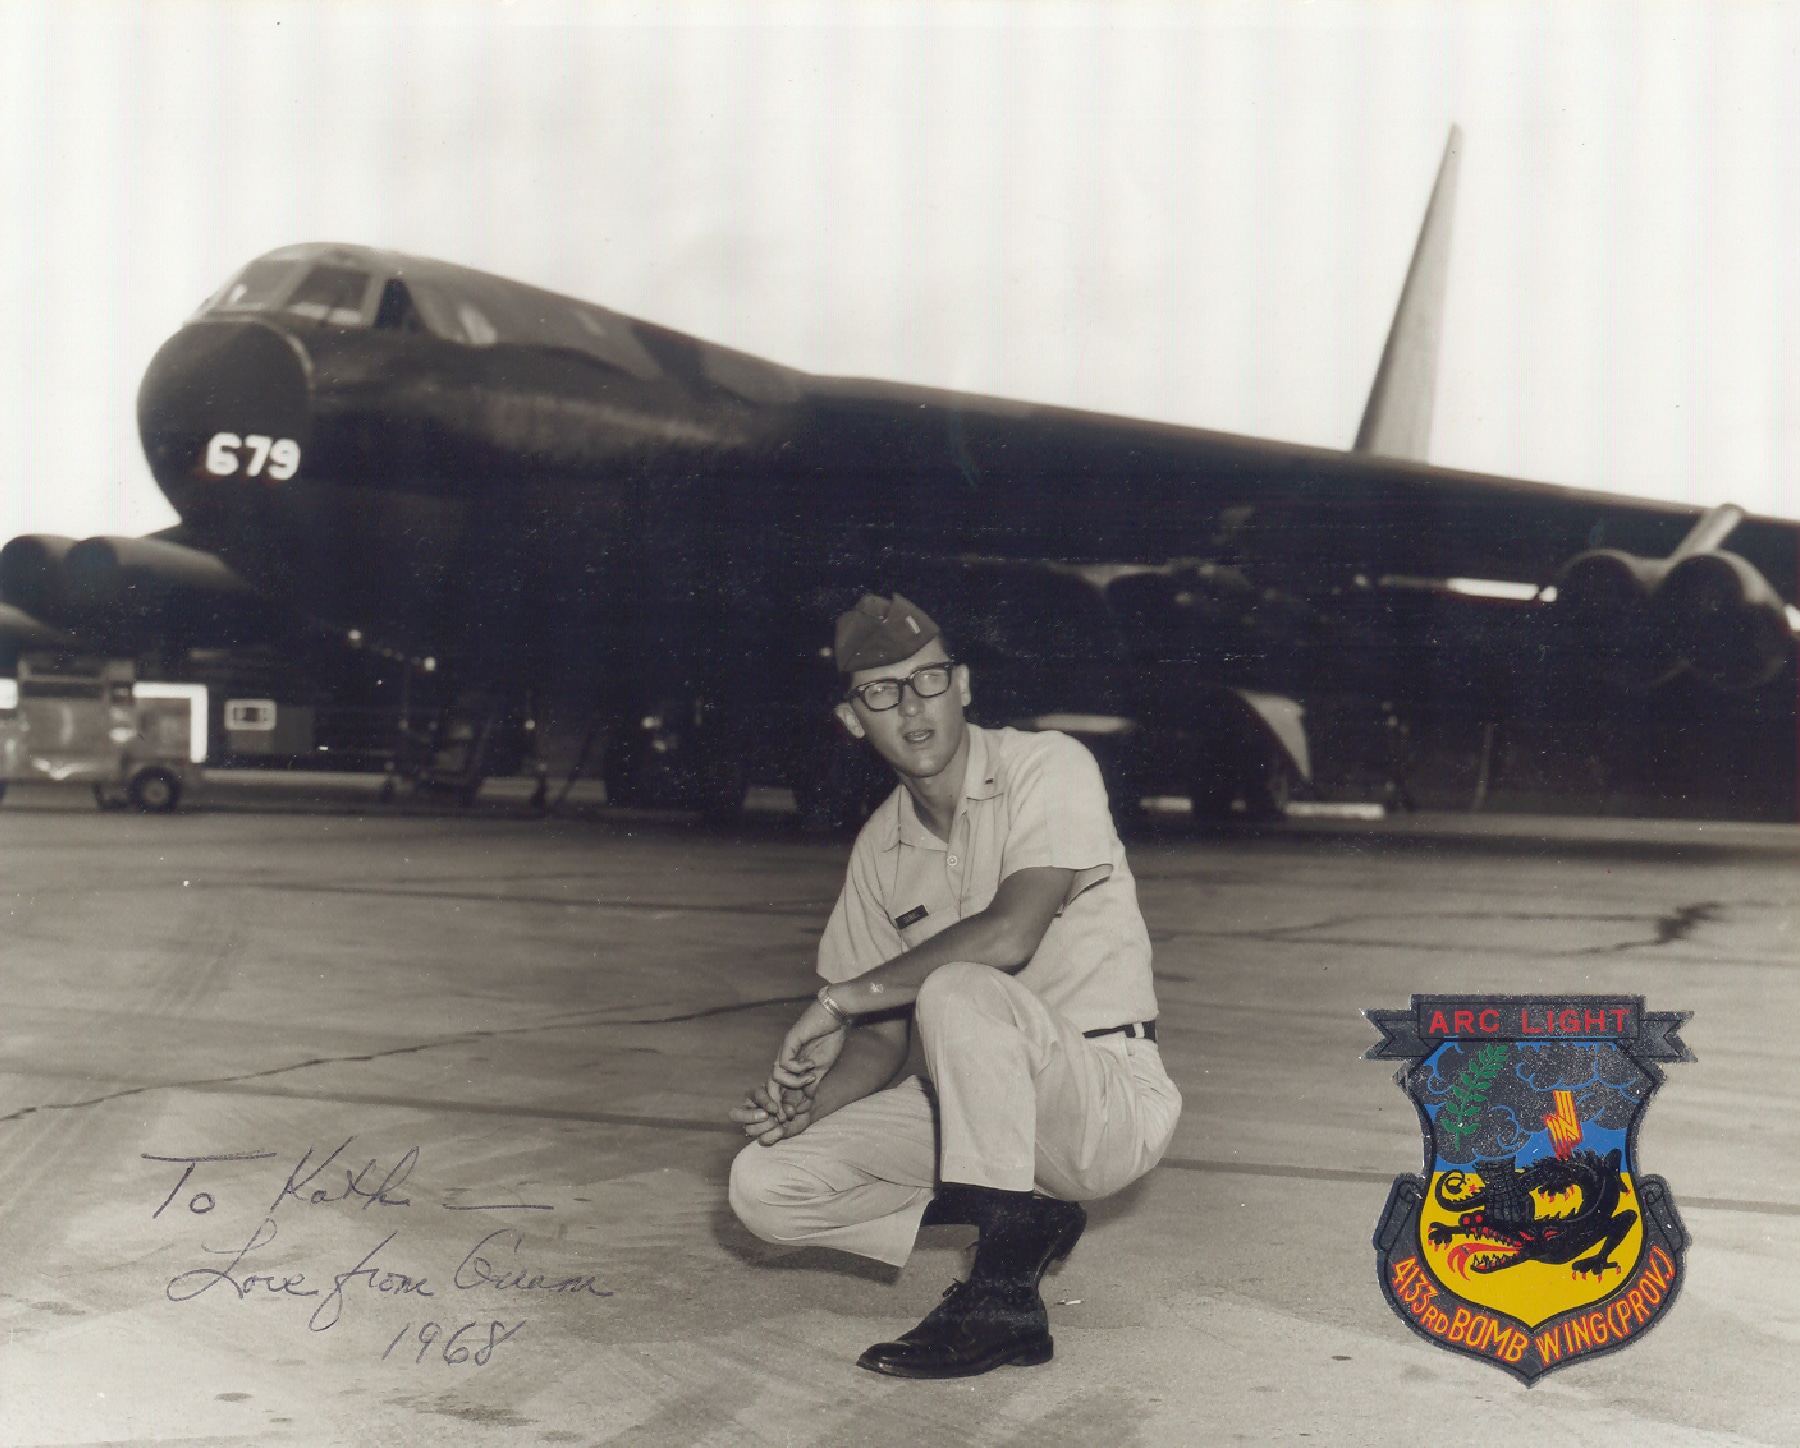 1st Lt. Dubiel in 1968 in front of a B-52 at Andersen AFB Guam